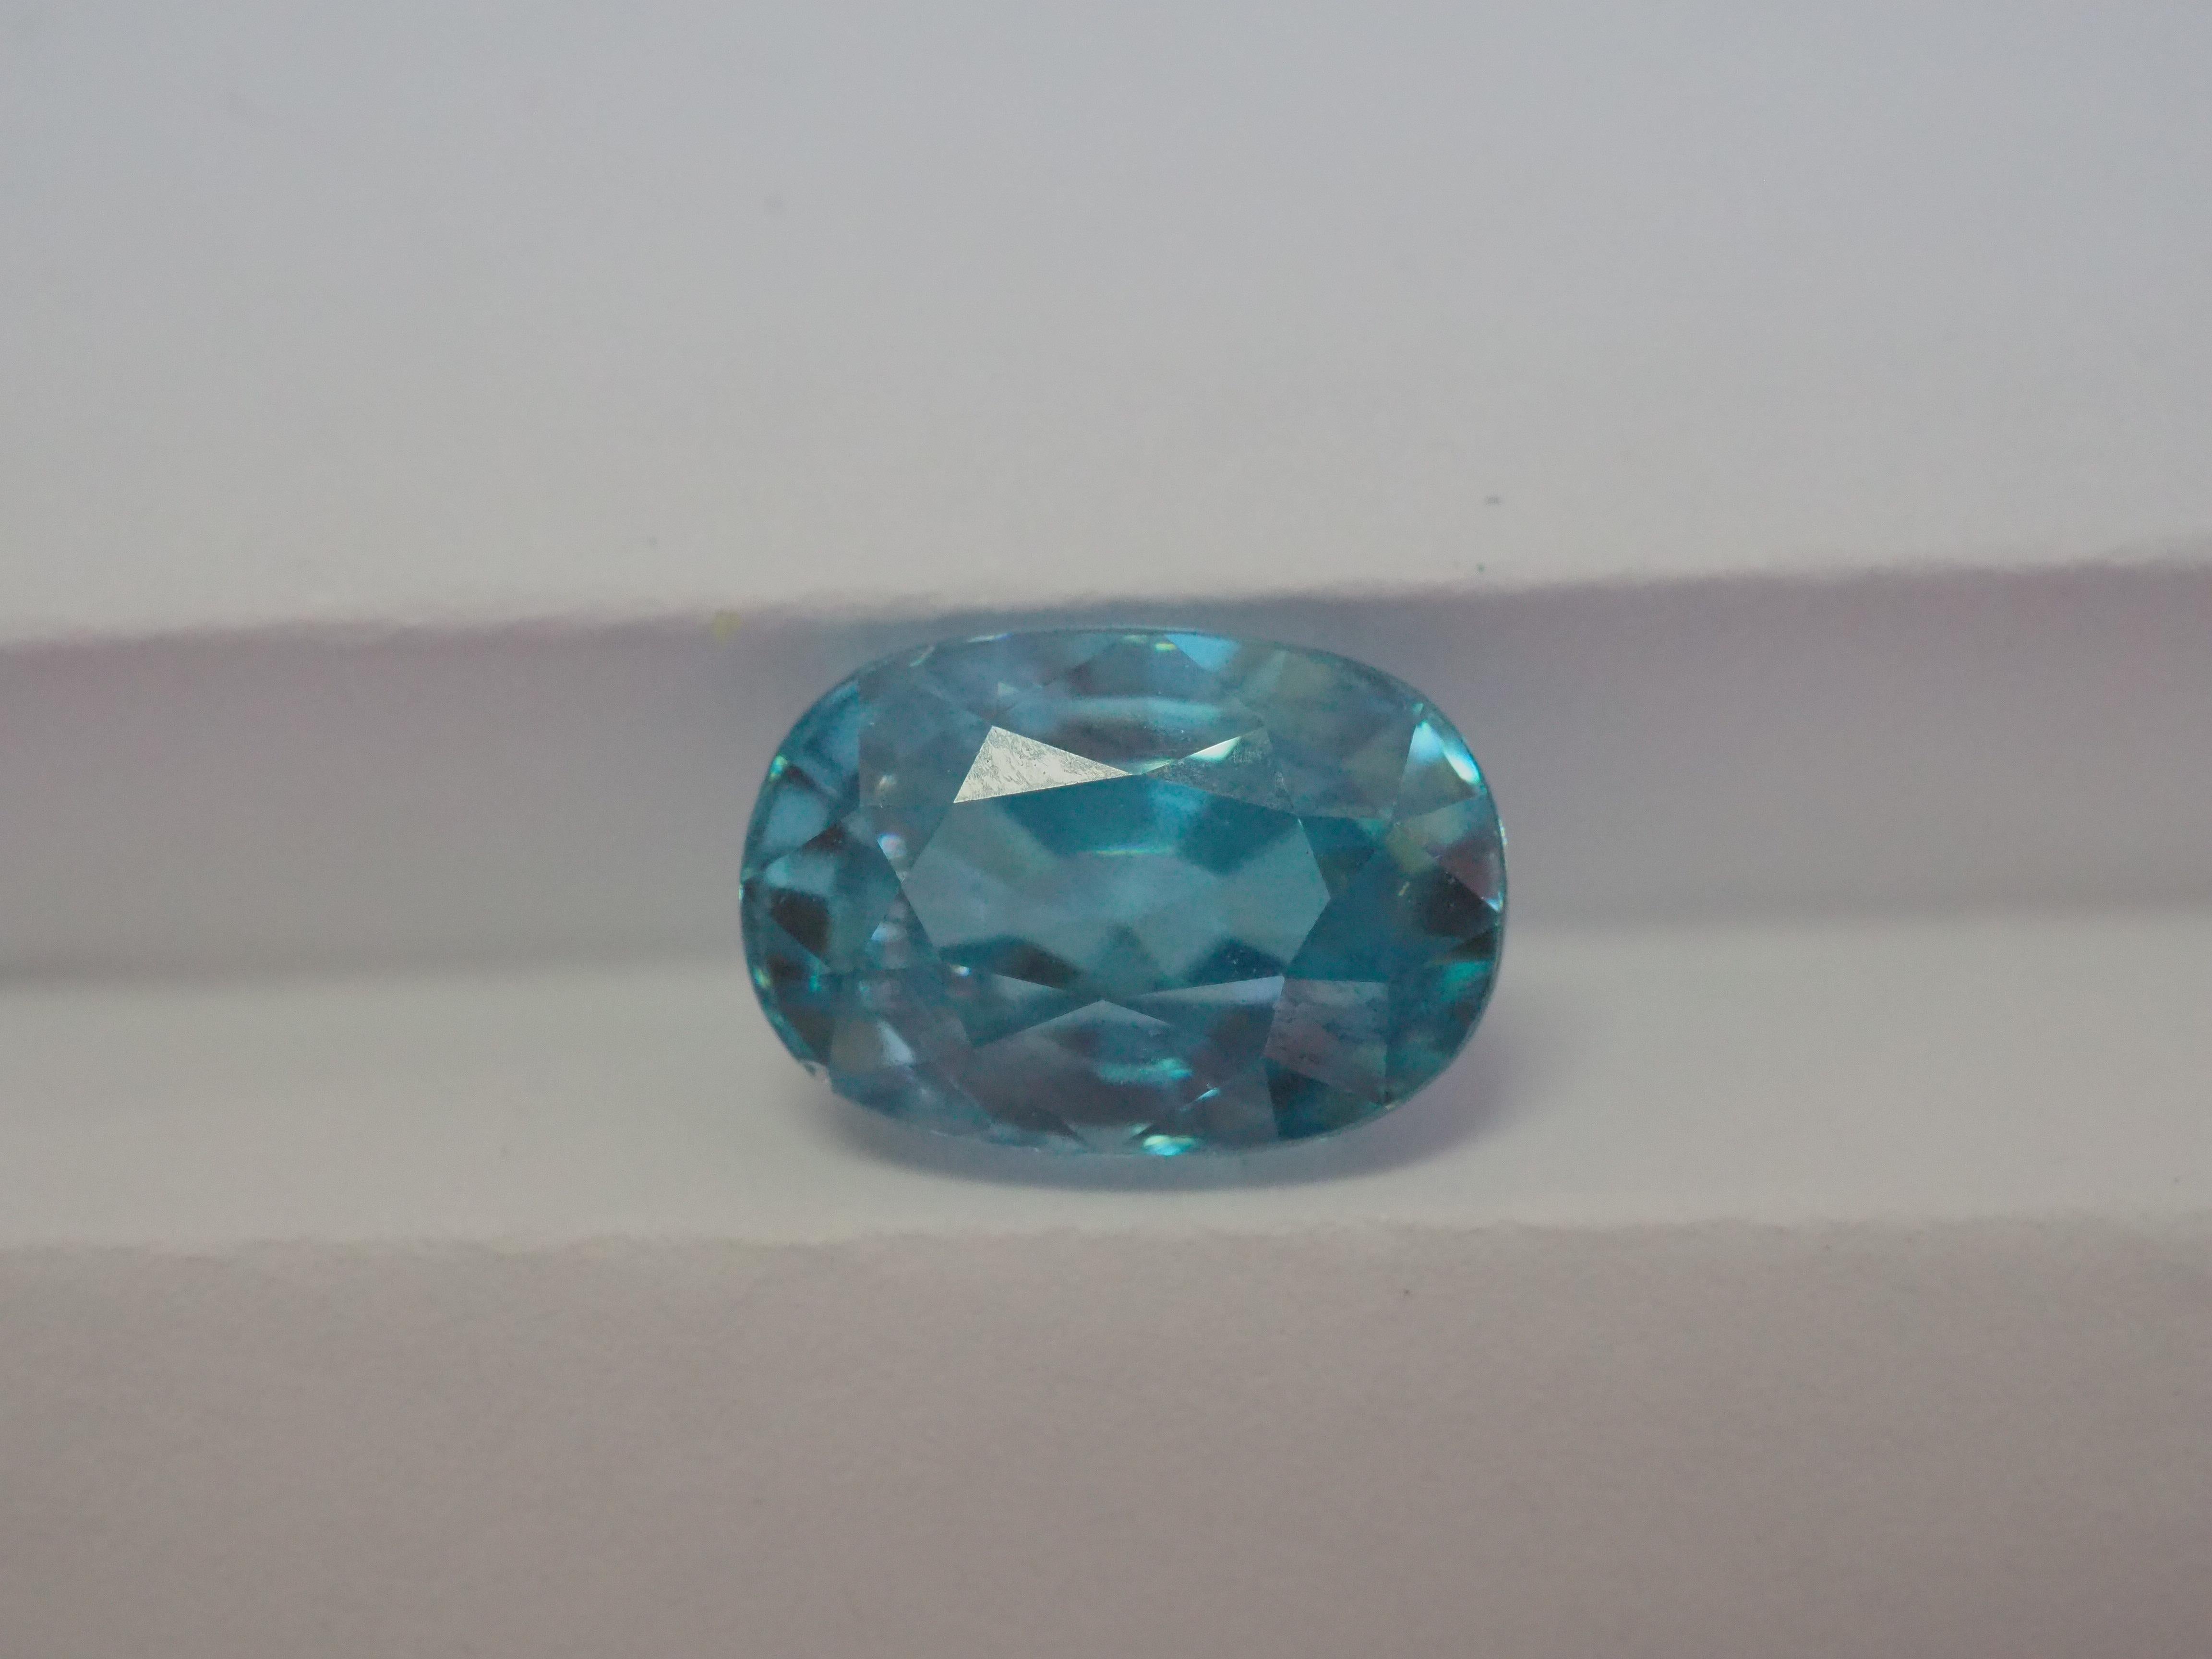 Eye clean.

This particular gem measures approximately 10.27x7.09x5.89 mm, providing ample space for intricate and creative jewelry designs. 

Sparkling blue color
Weight= 4.80 carats

The country of origin for this zircon is Cambodia

-Come with